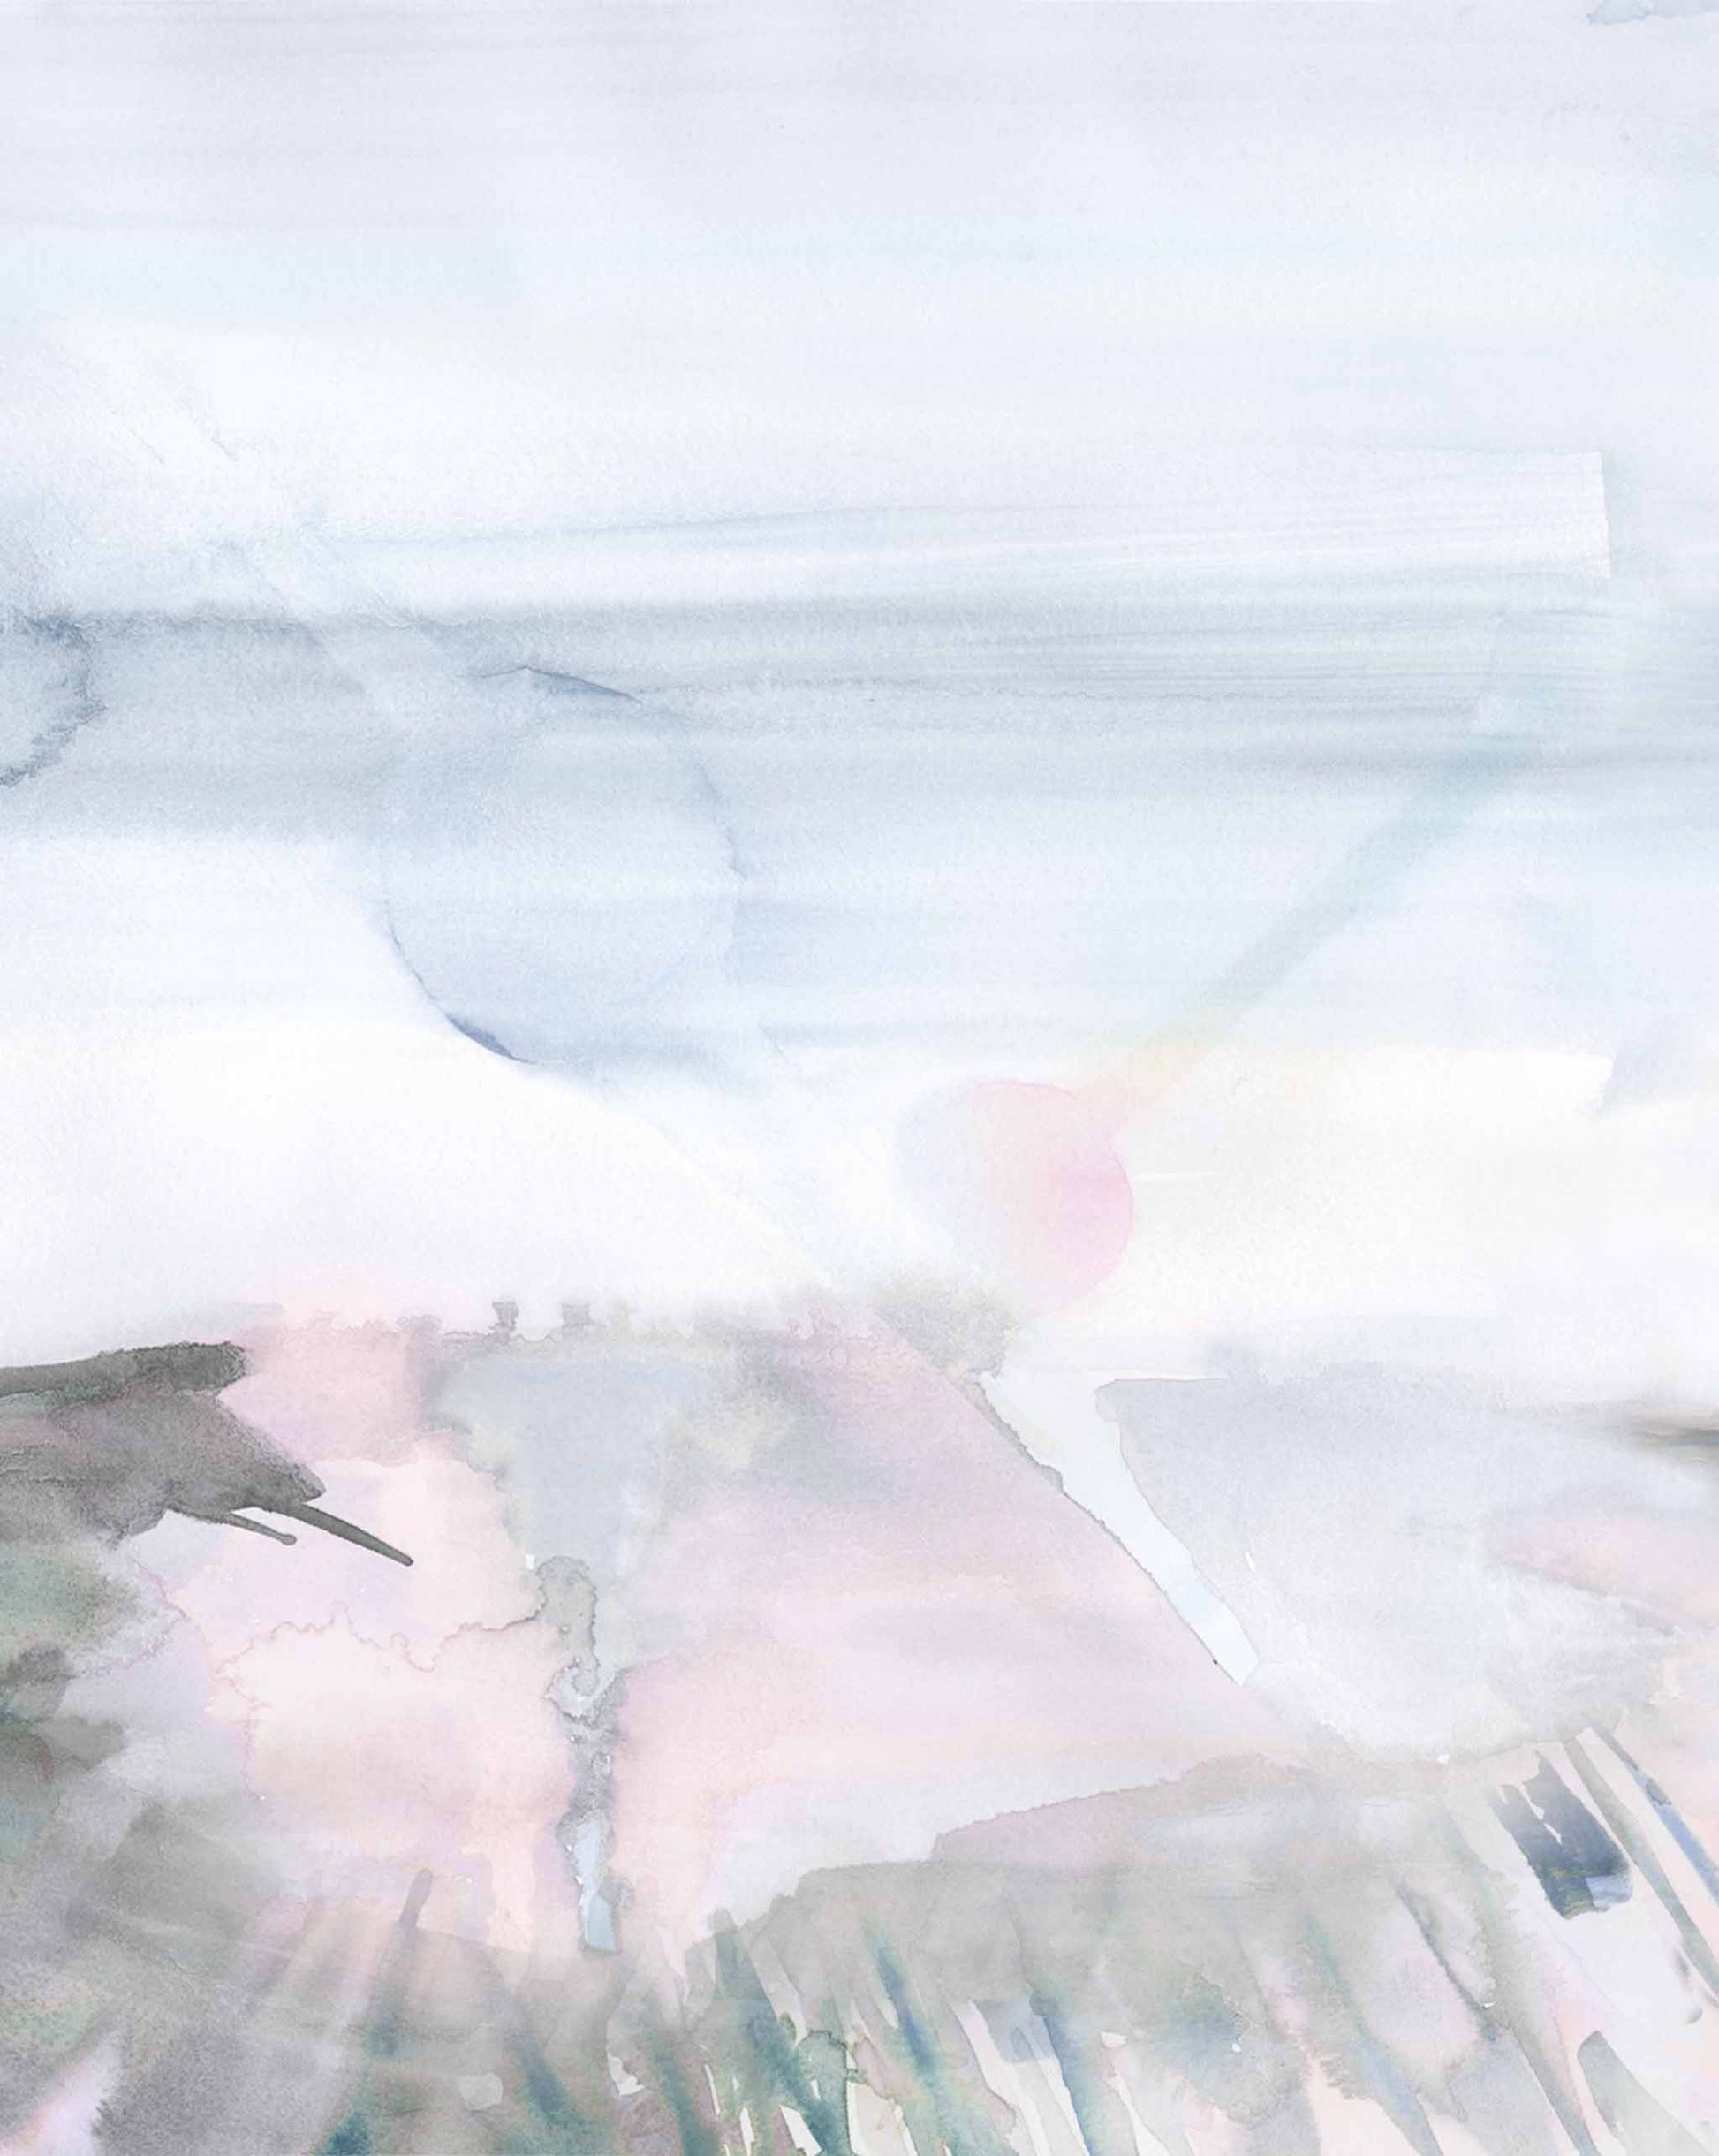 Abstract watercolor painting from Eskayel's Lily's View Wallpaper Mural||Dusk with soft washes of pink, blue, and gray, resembling a serene, dreamlike landscape.